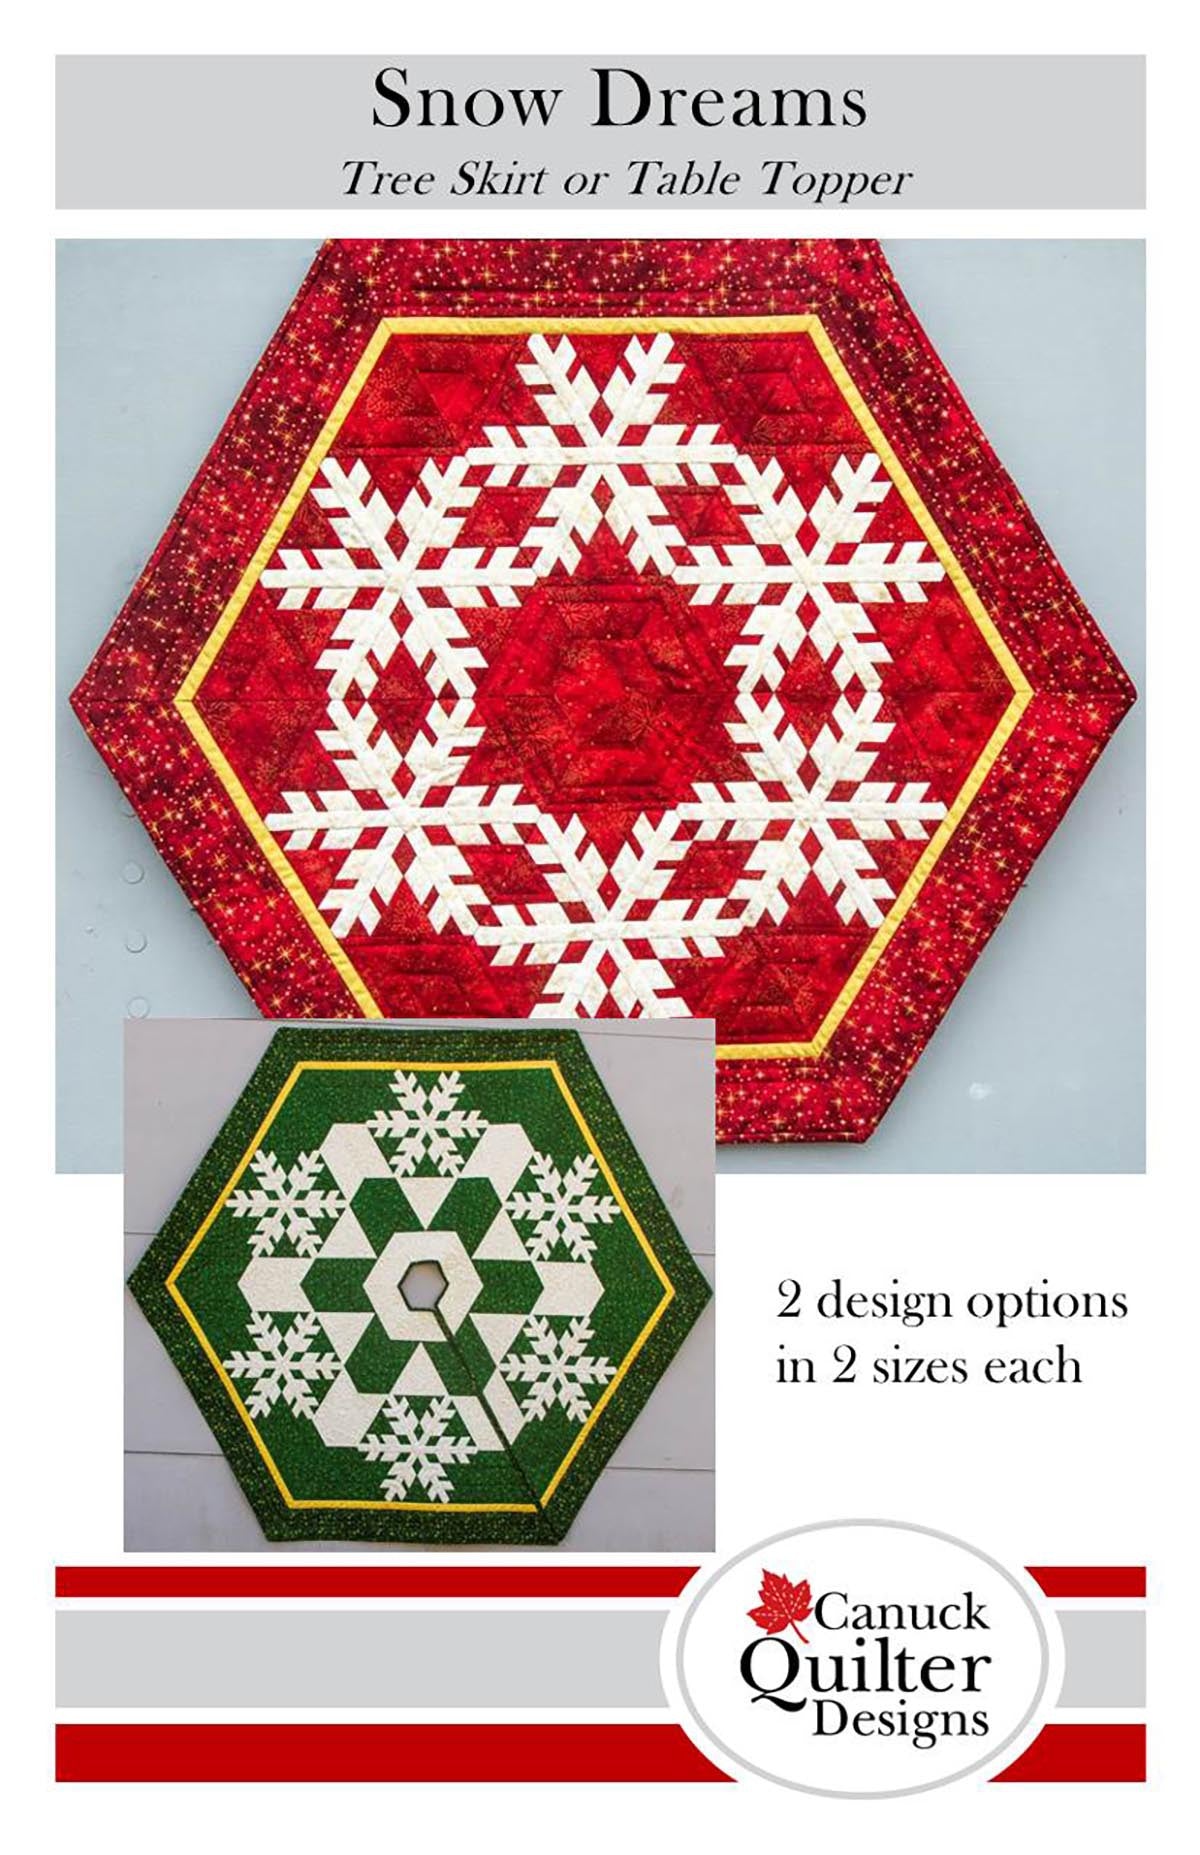 Snow Dreams Tree Skirt or Table Topper Quilt Pattern by Joanne Kerton of Canuck Quilter Designs